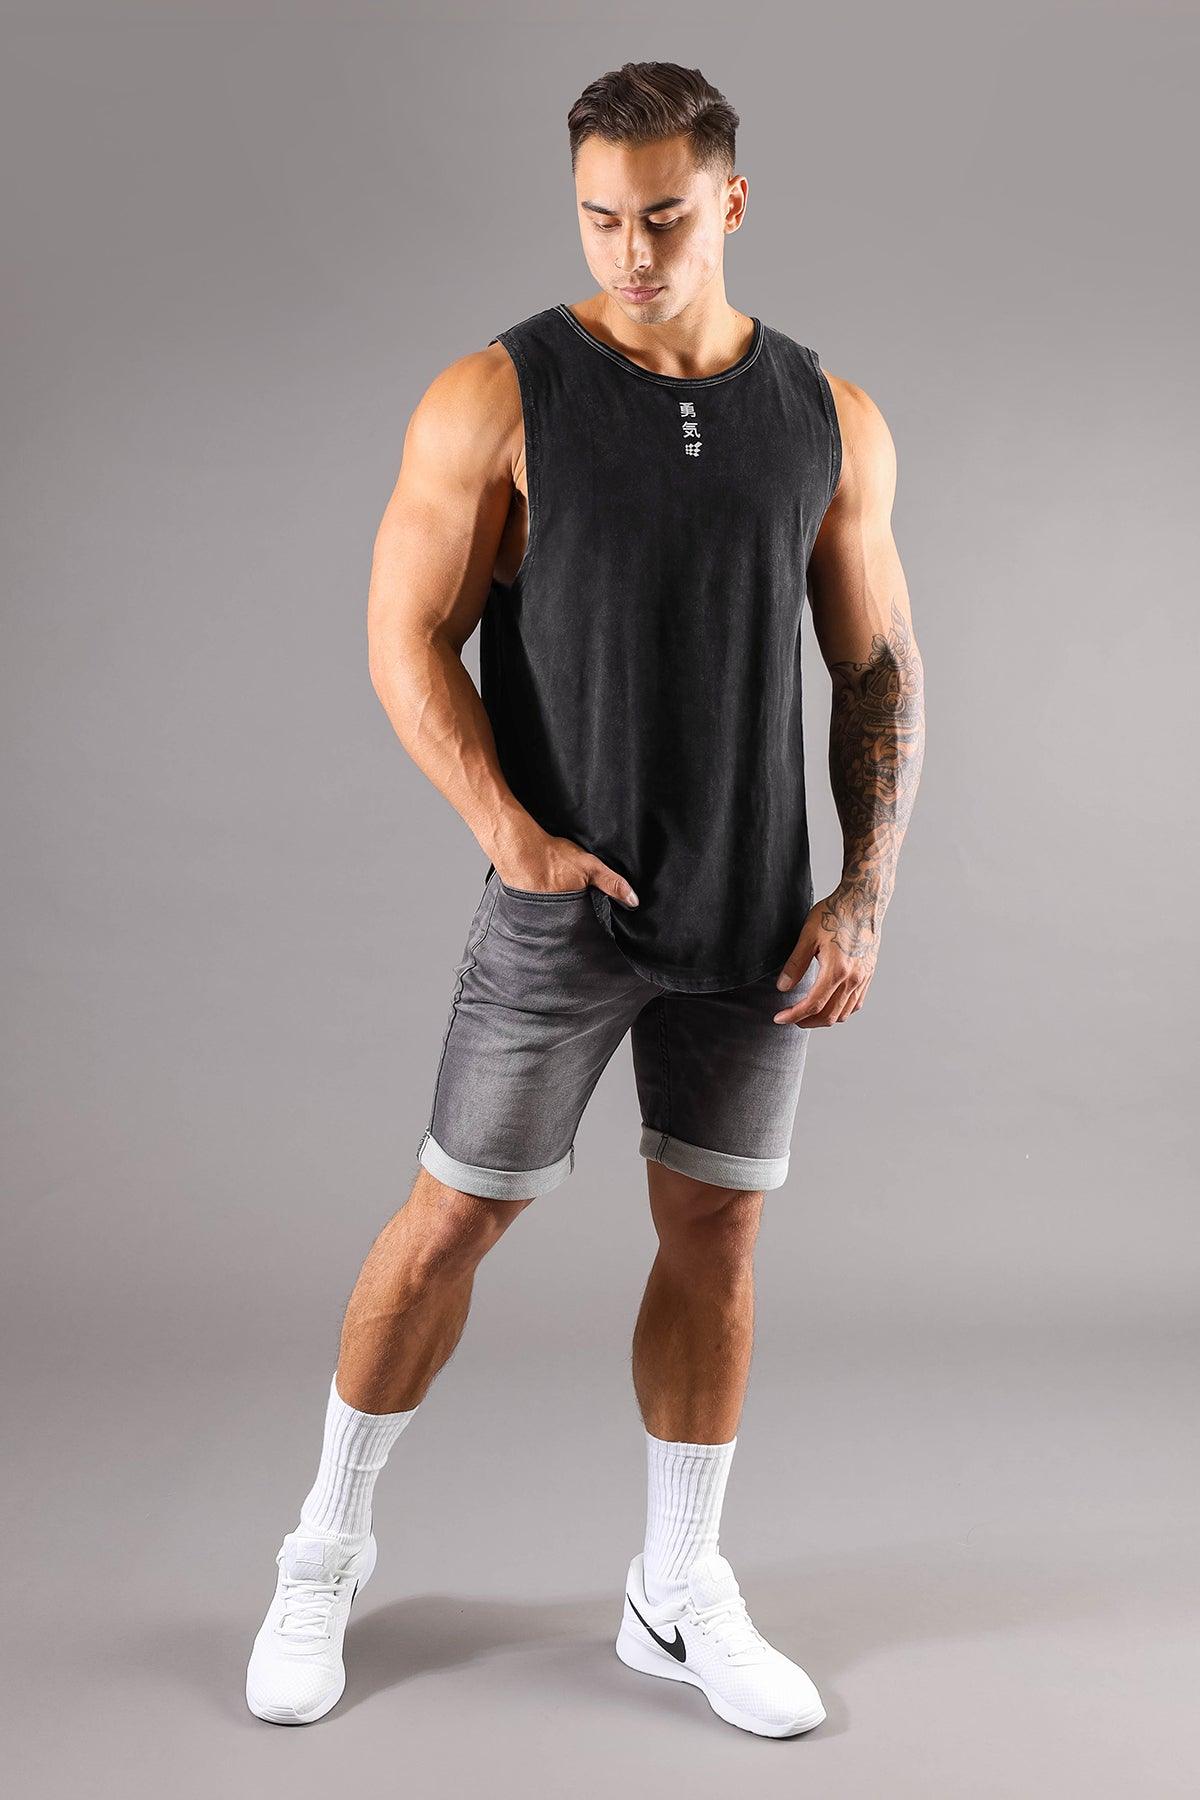 Luxe Flex Training Muscle Tee - Courage - Jed North